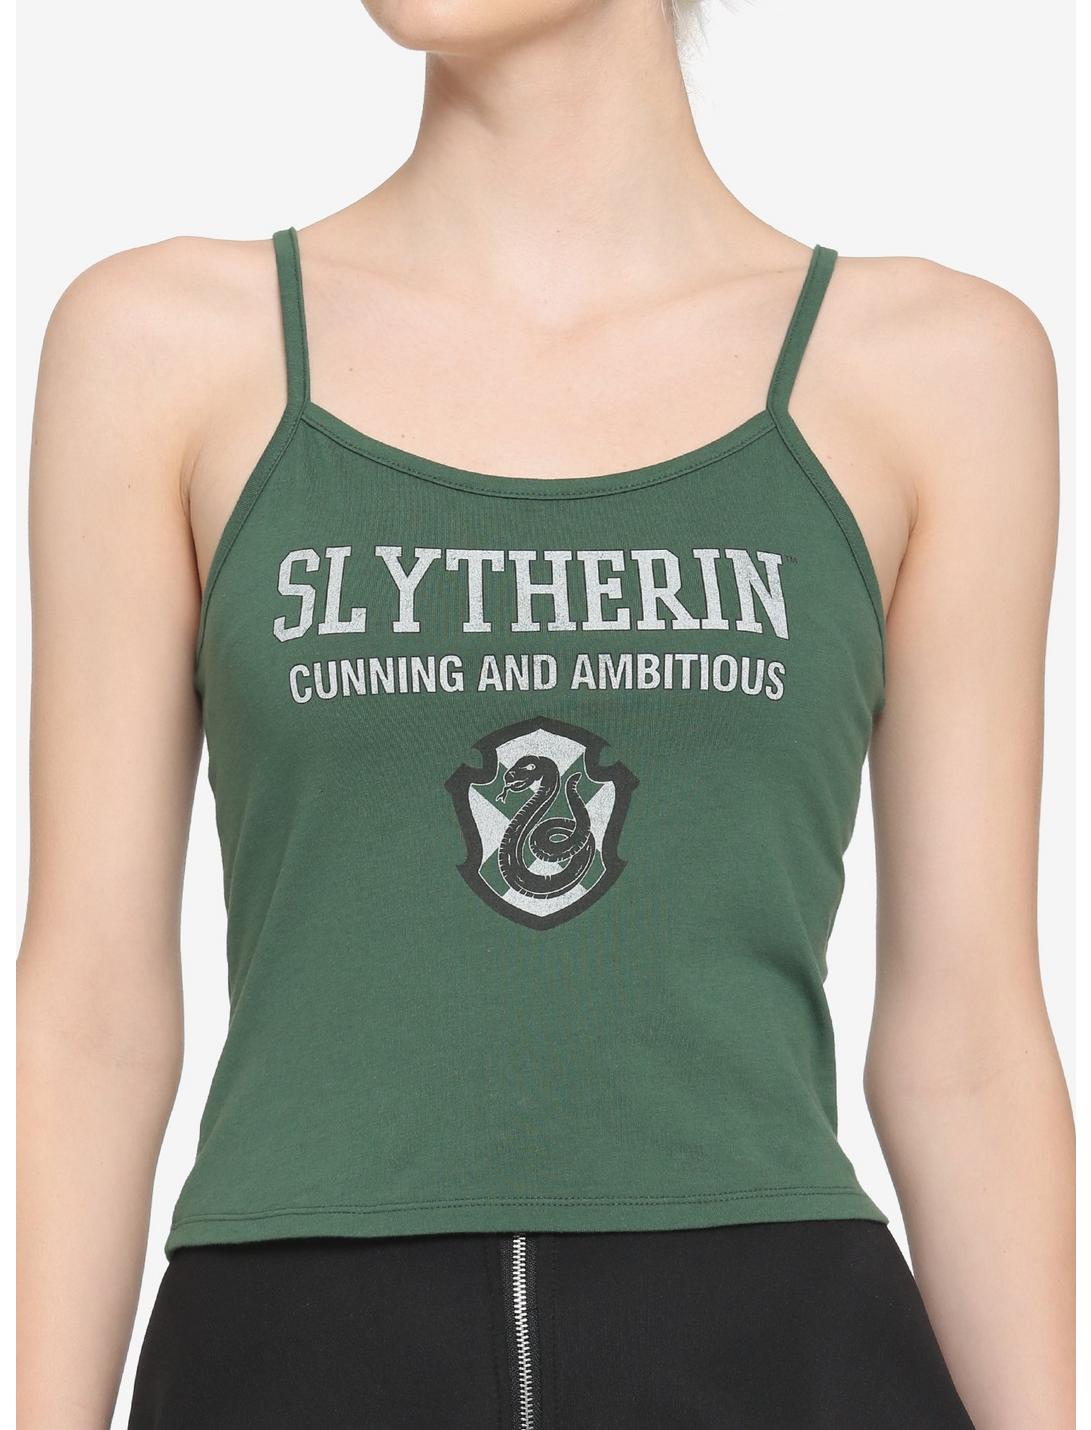 Harry Potter Slytherin Girls Strappy Crop Tank Top, MULTI, hi-res